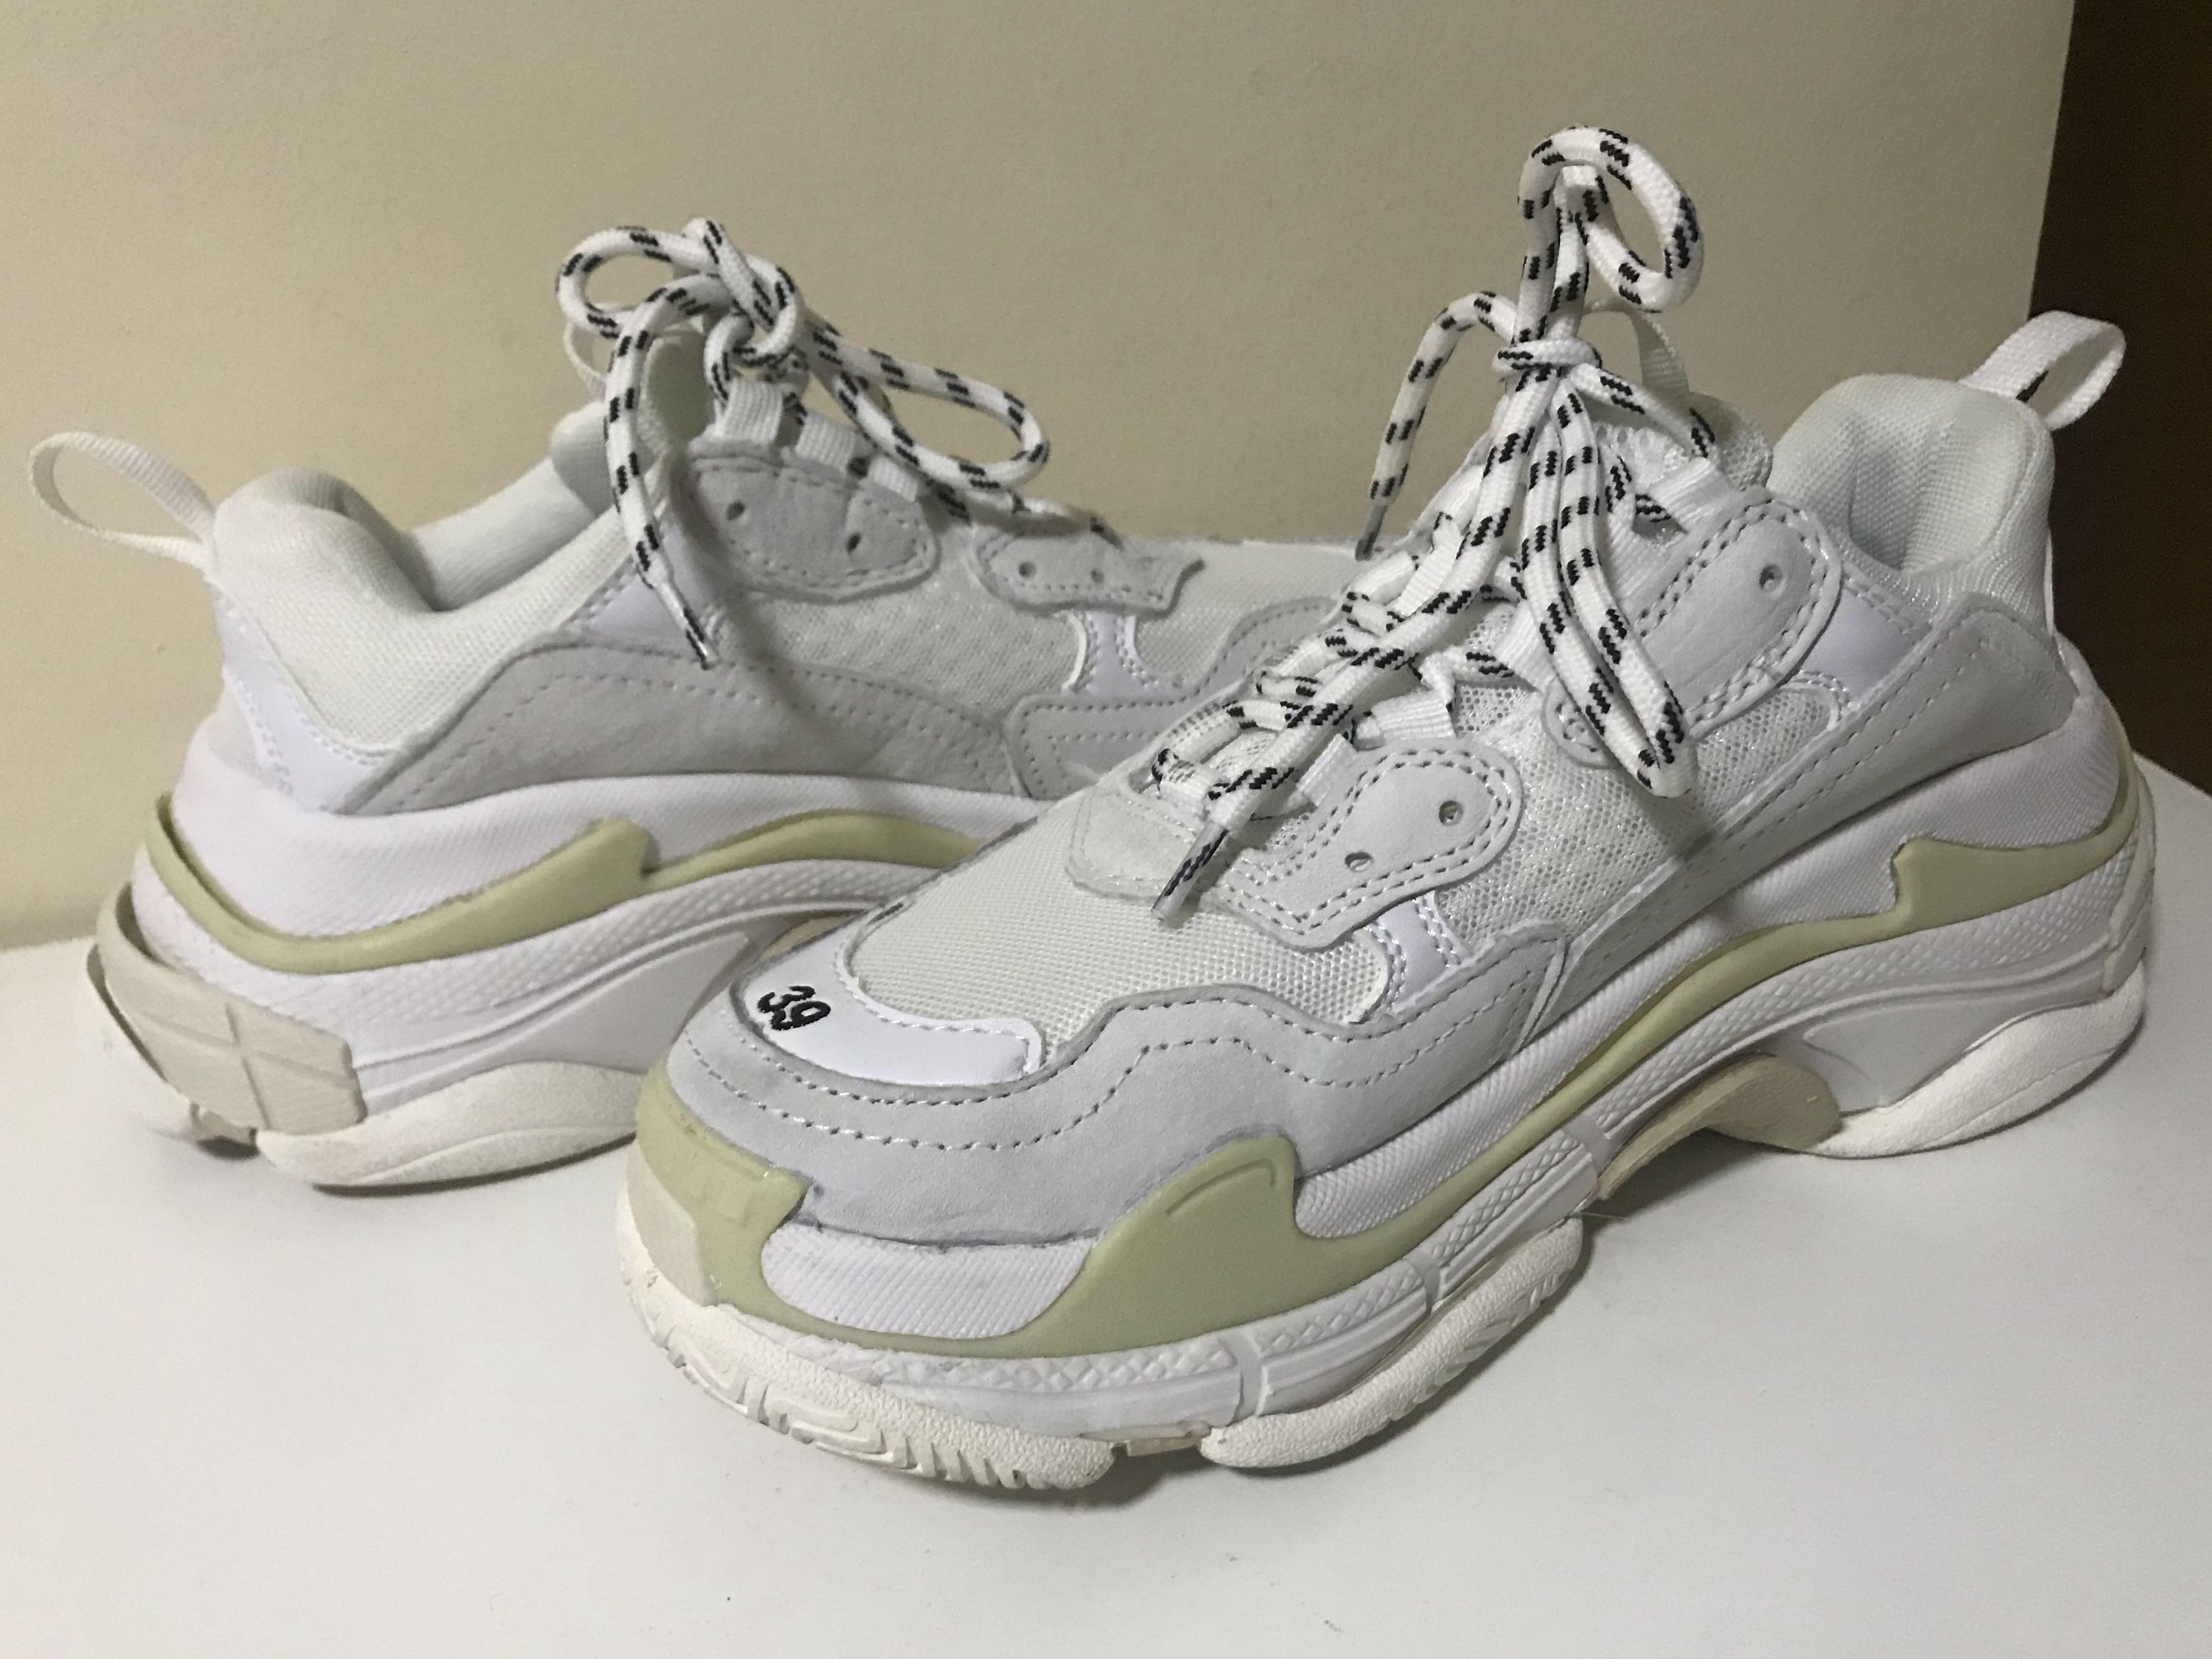 balenciaga Blue grey and red Triple S sneakers available